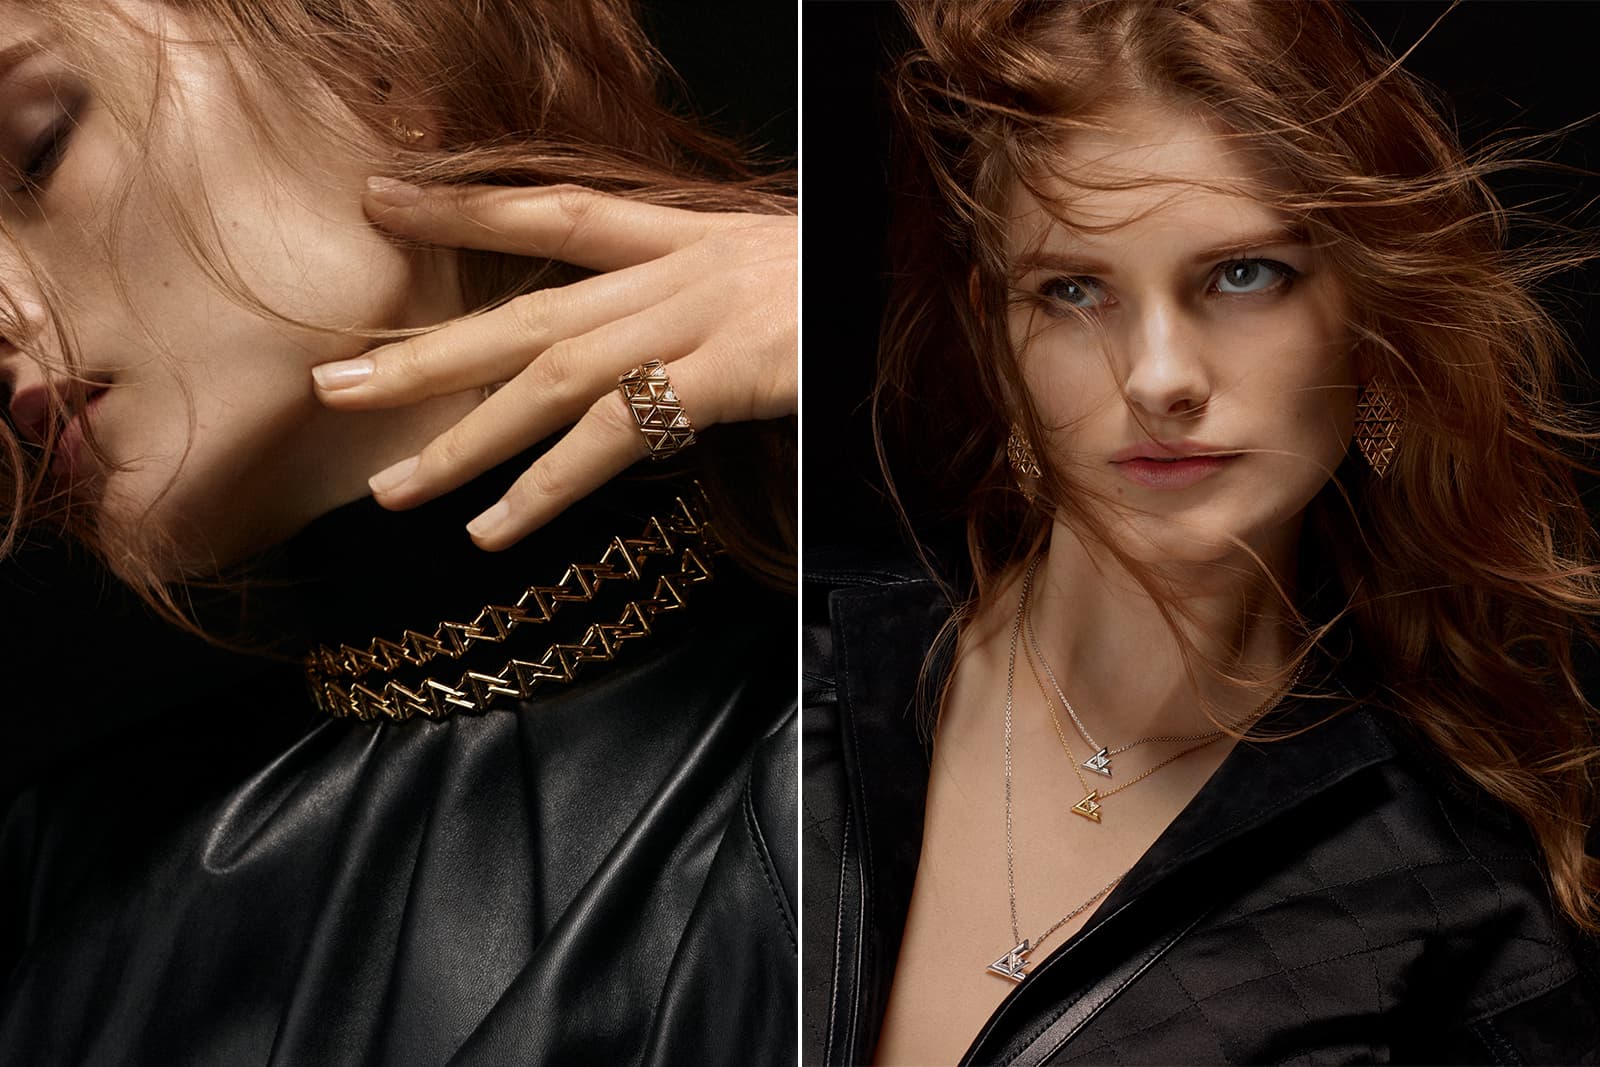 Louis Vuitton's LV Volt Jewels are Bold, Gold and 100% Unisex